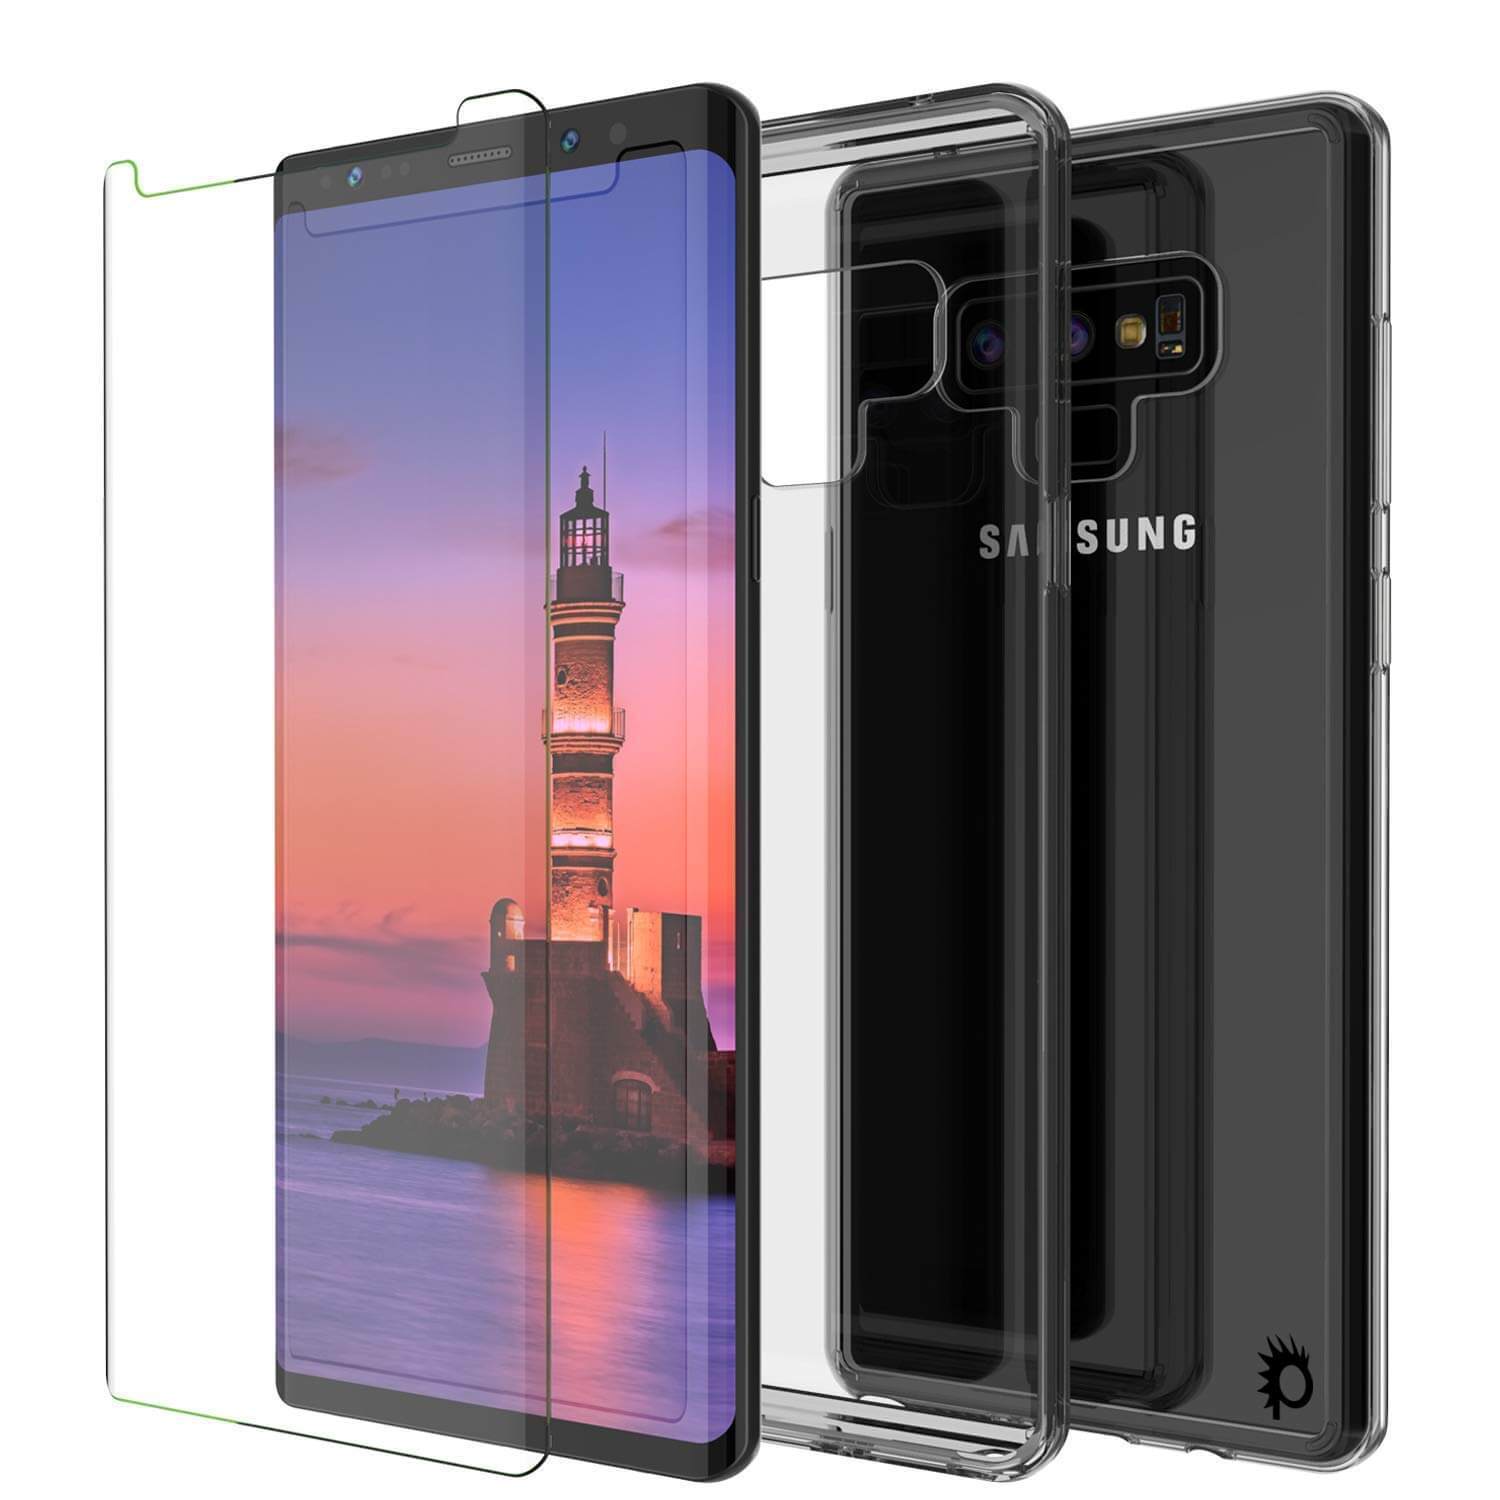 Galaxy Note 10+ Plus Punkcase Lucid-2.0 Series Slim Fit Armor Crystal Black Case Cover